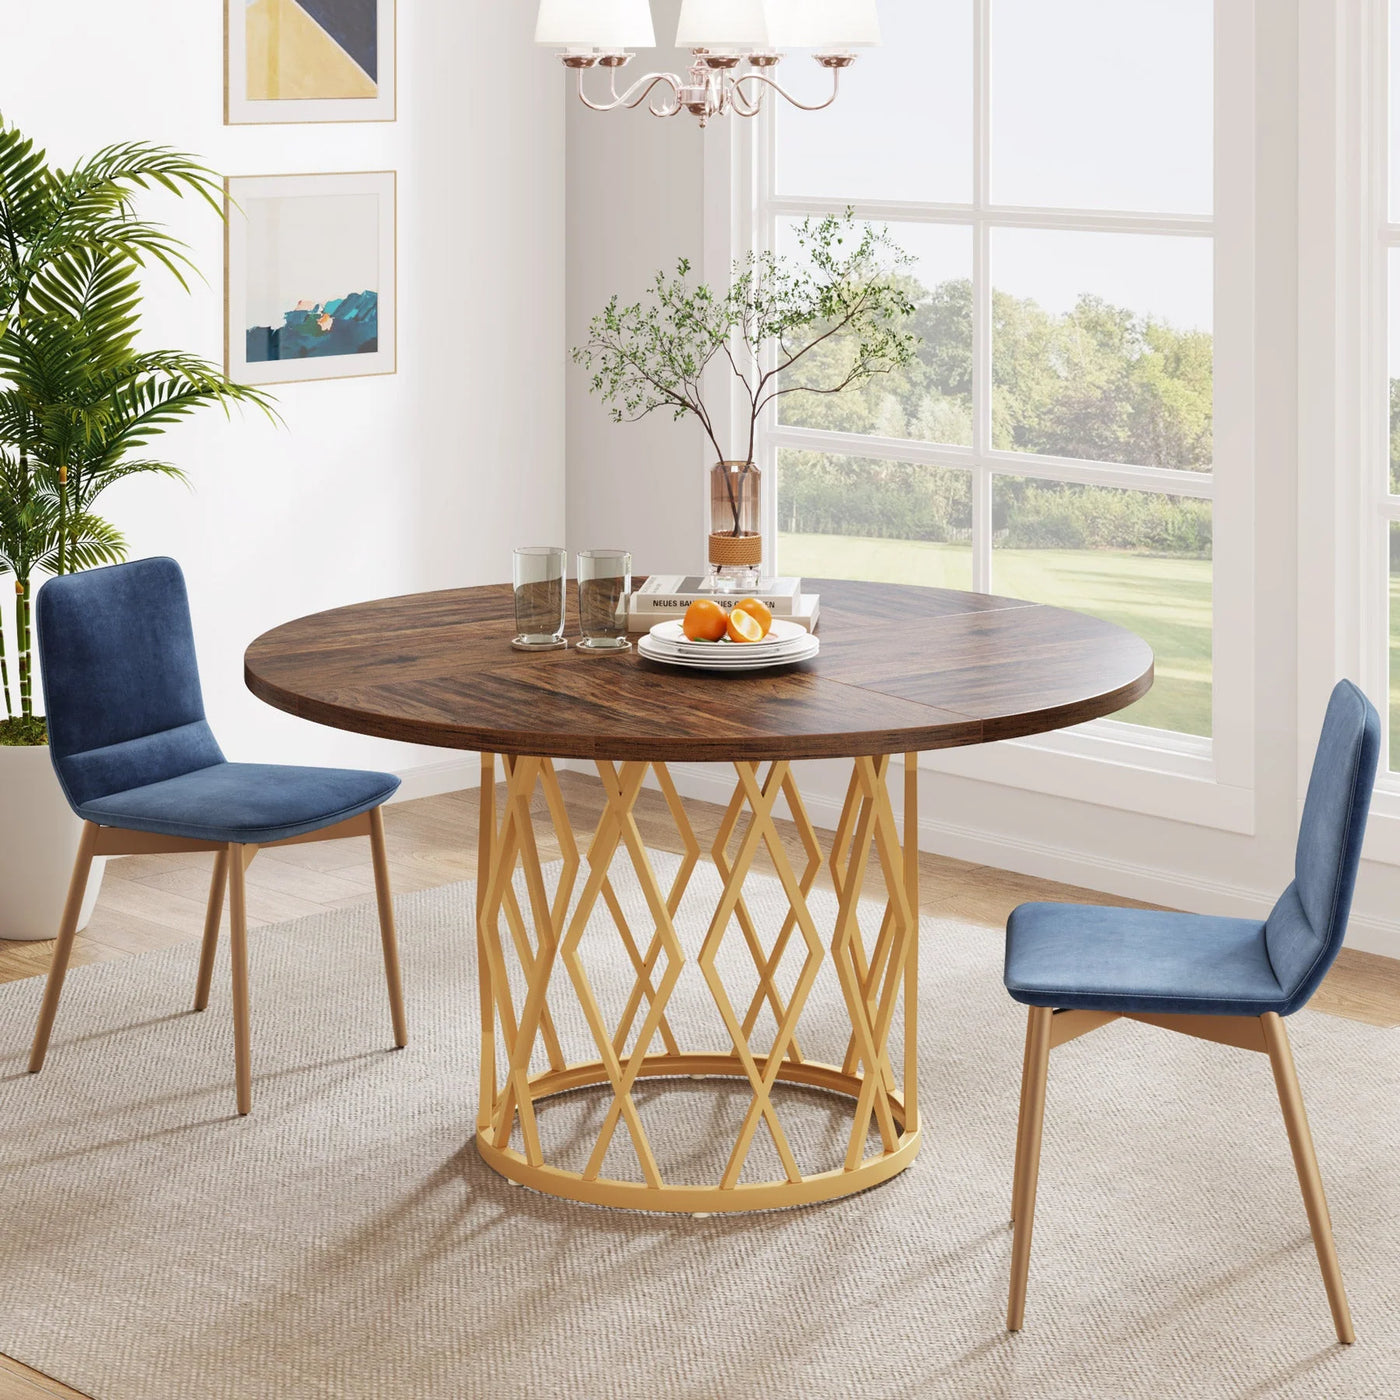 Lennon Round Dining Table for 4-6 People | 47.2" Circle Kitchen Dinner Table with Metal Base